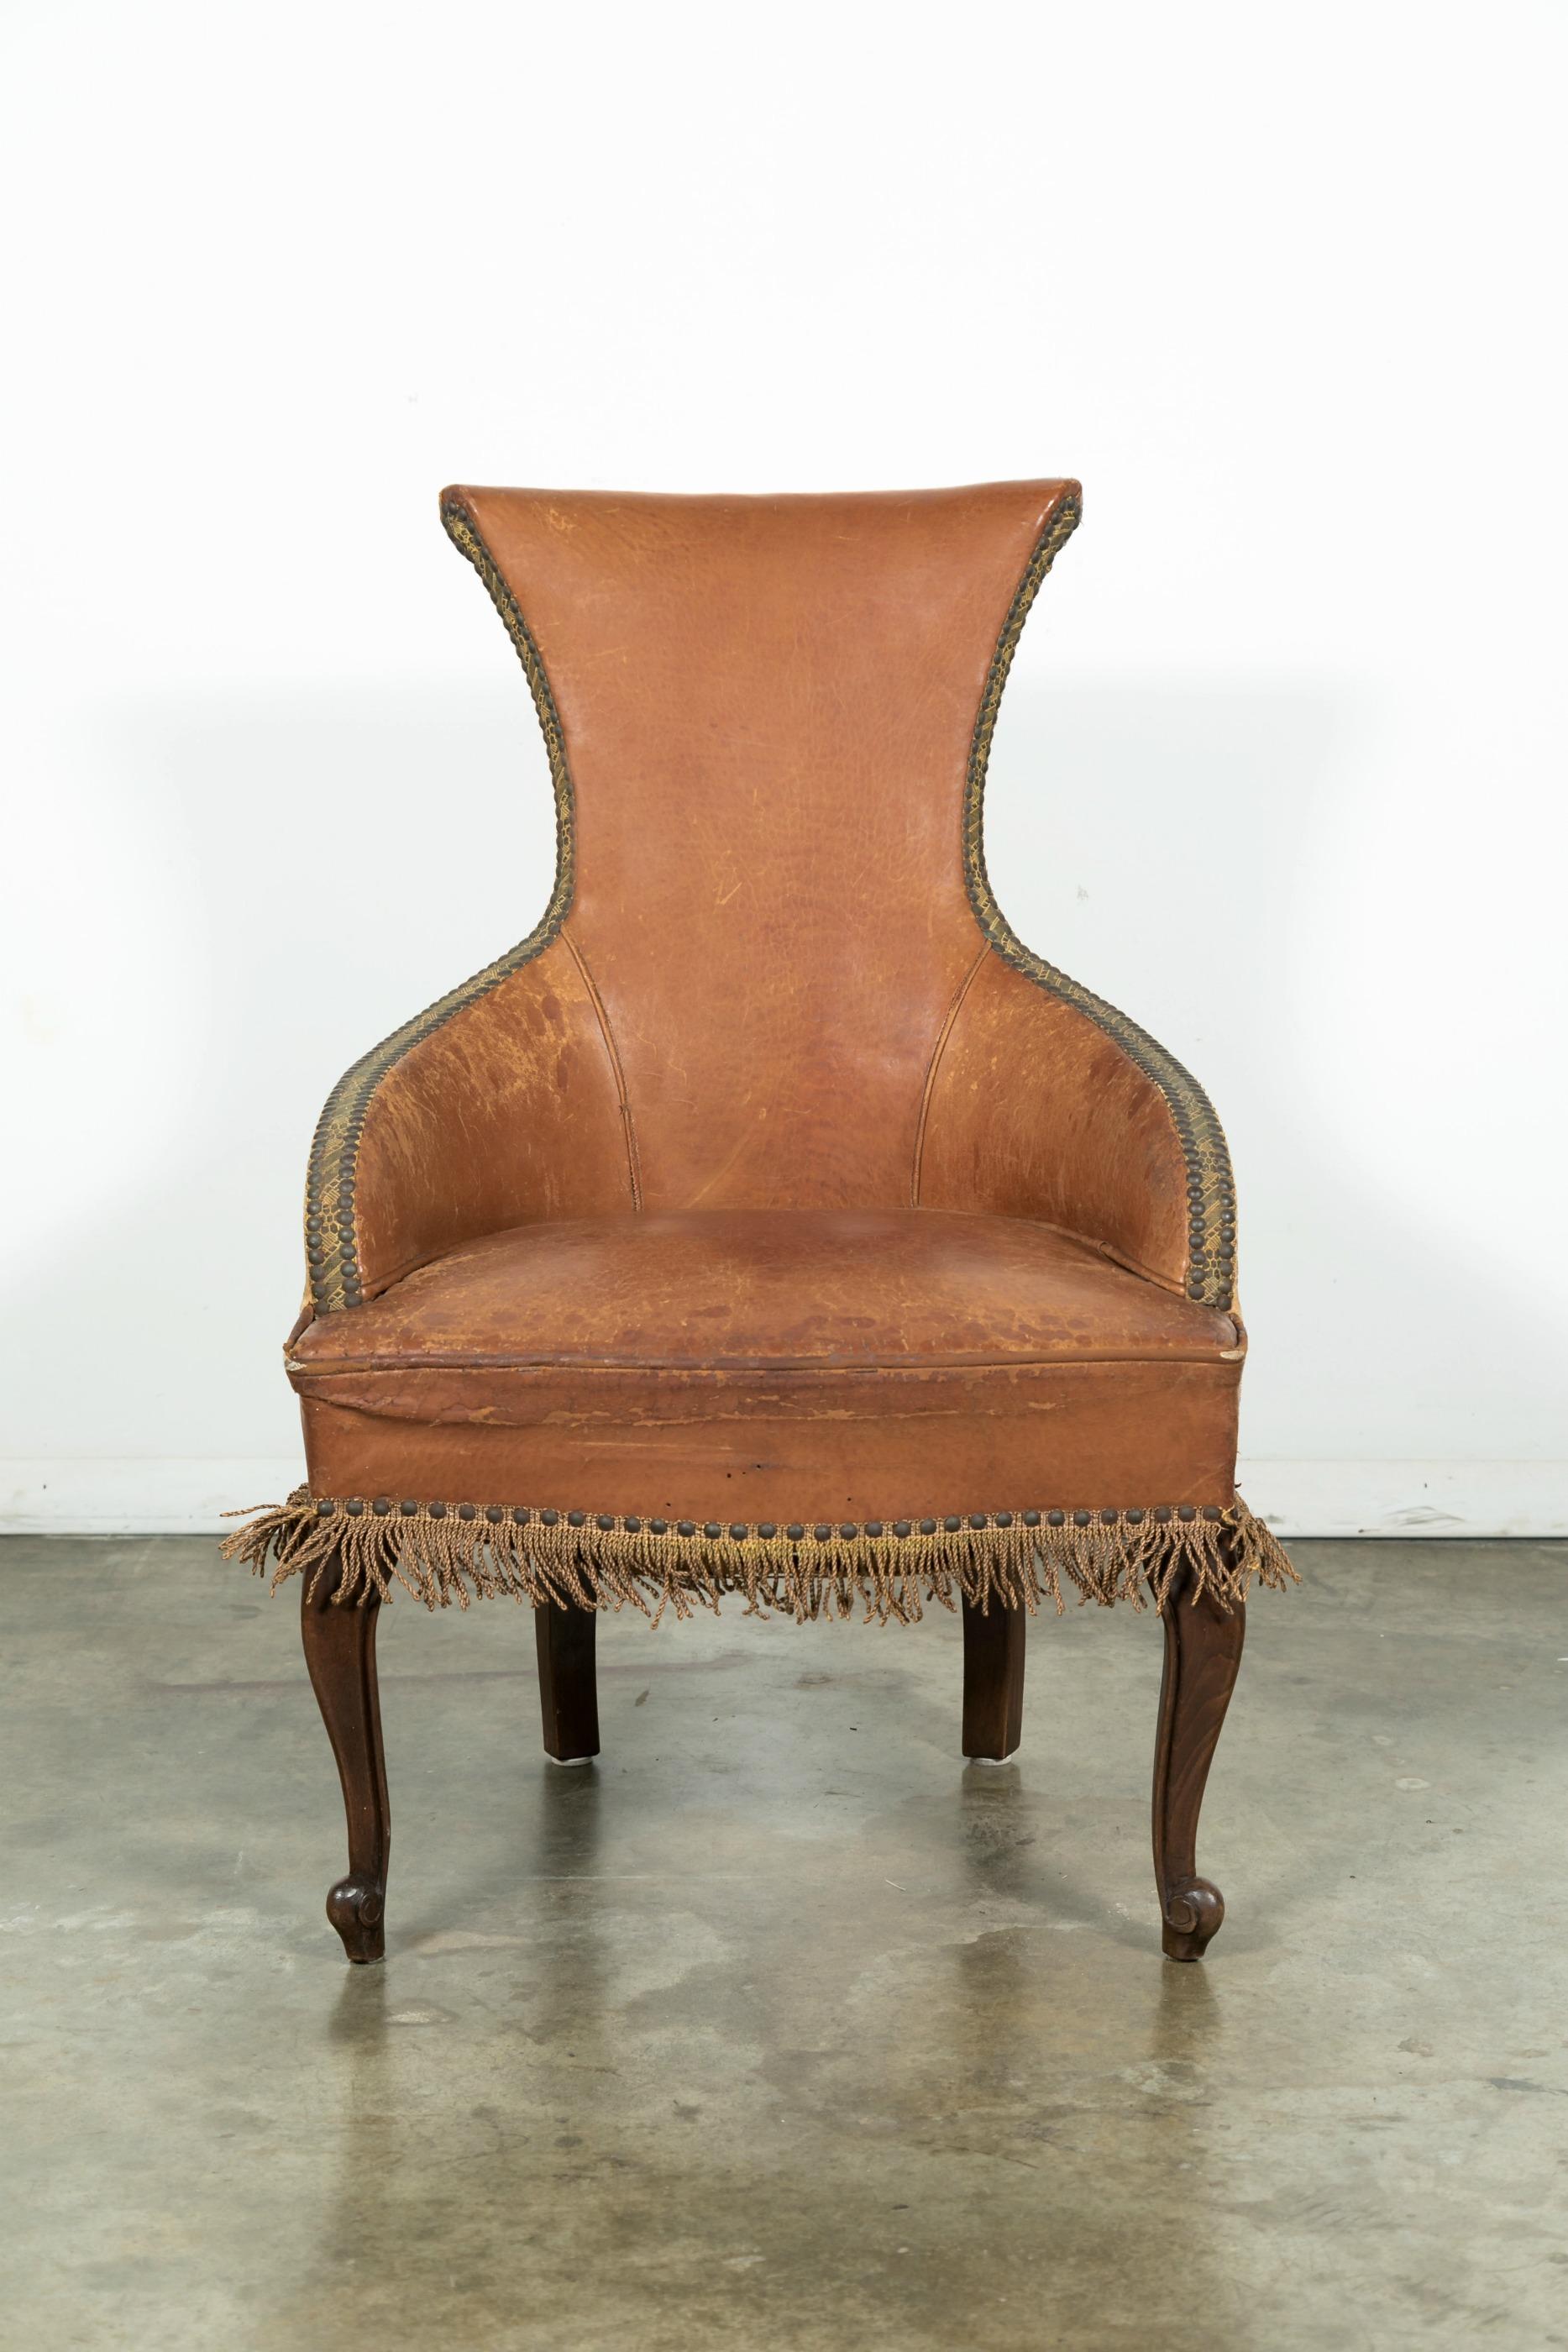 Antique French Louis XV style leather and velvet upholstered bergère having a high rolled back and finished with nail head trim and bullion fringe. Raised on short cabriole legs with scrolled French toes. Unique and beautiful with its graceful